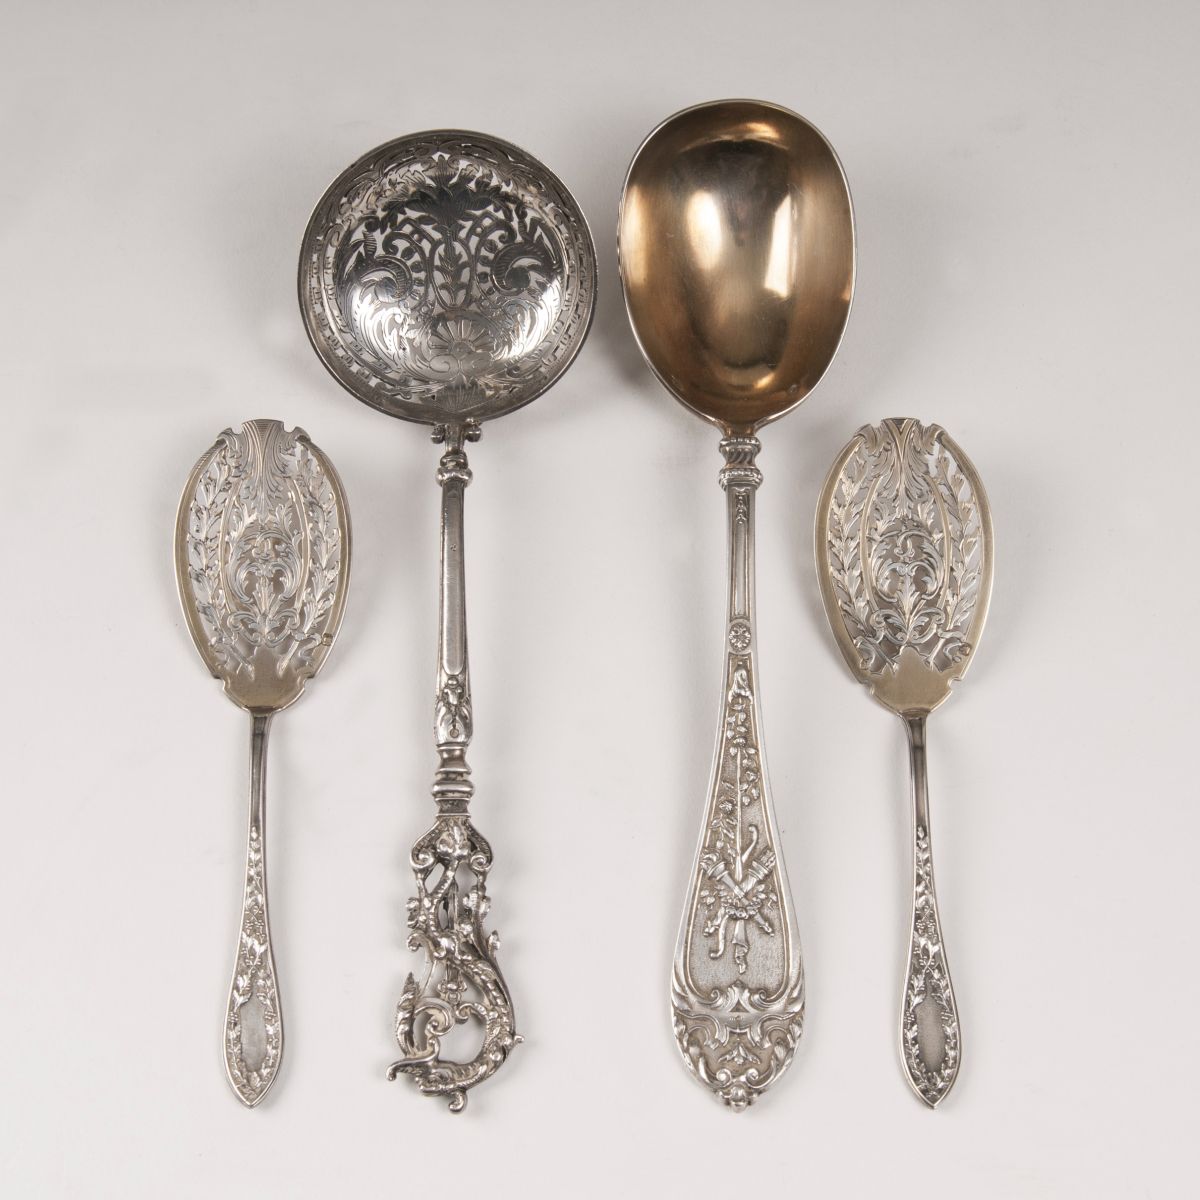 A serving cutlery in historicism style